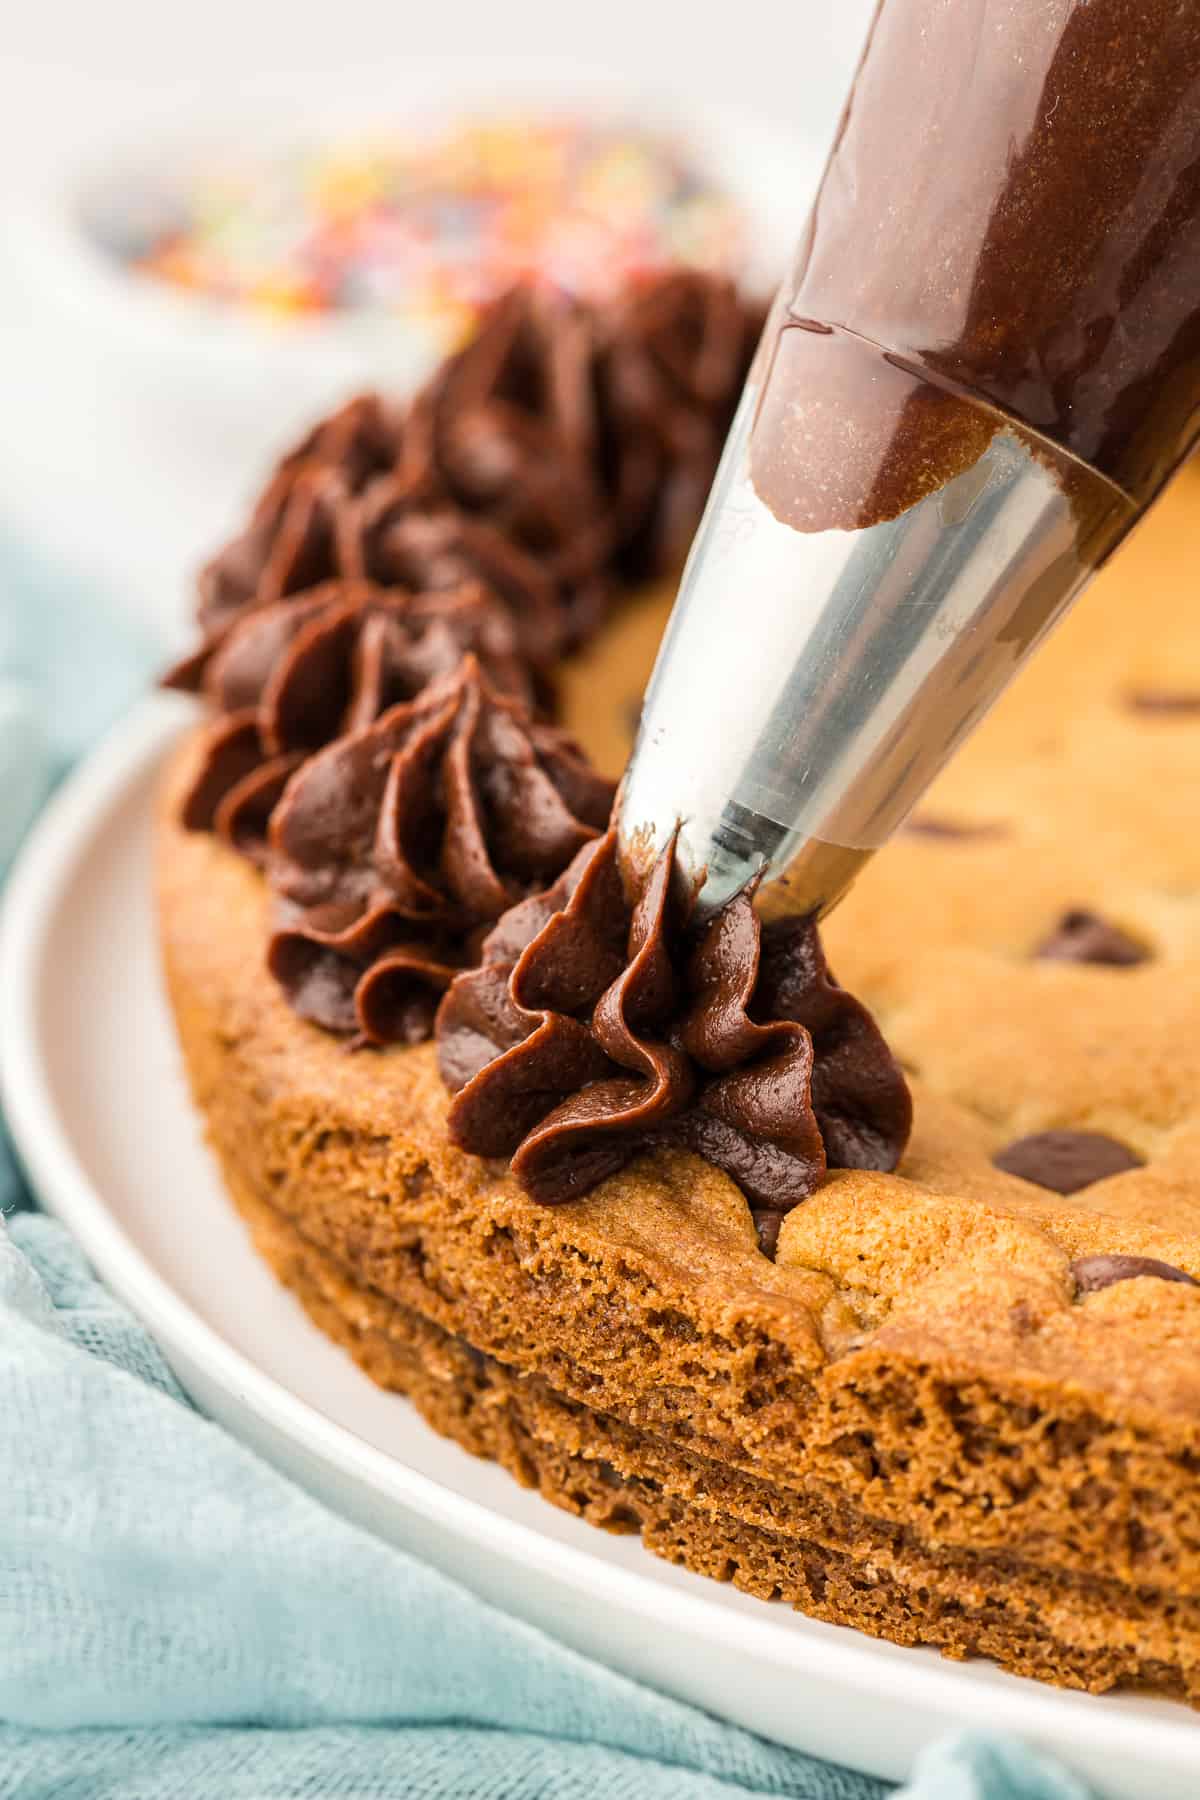 cookie cake being decorated with chocolate frosting from a piping bag